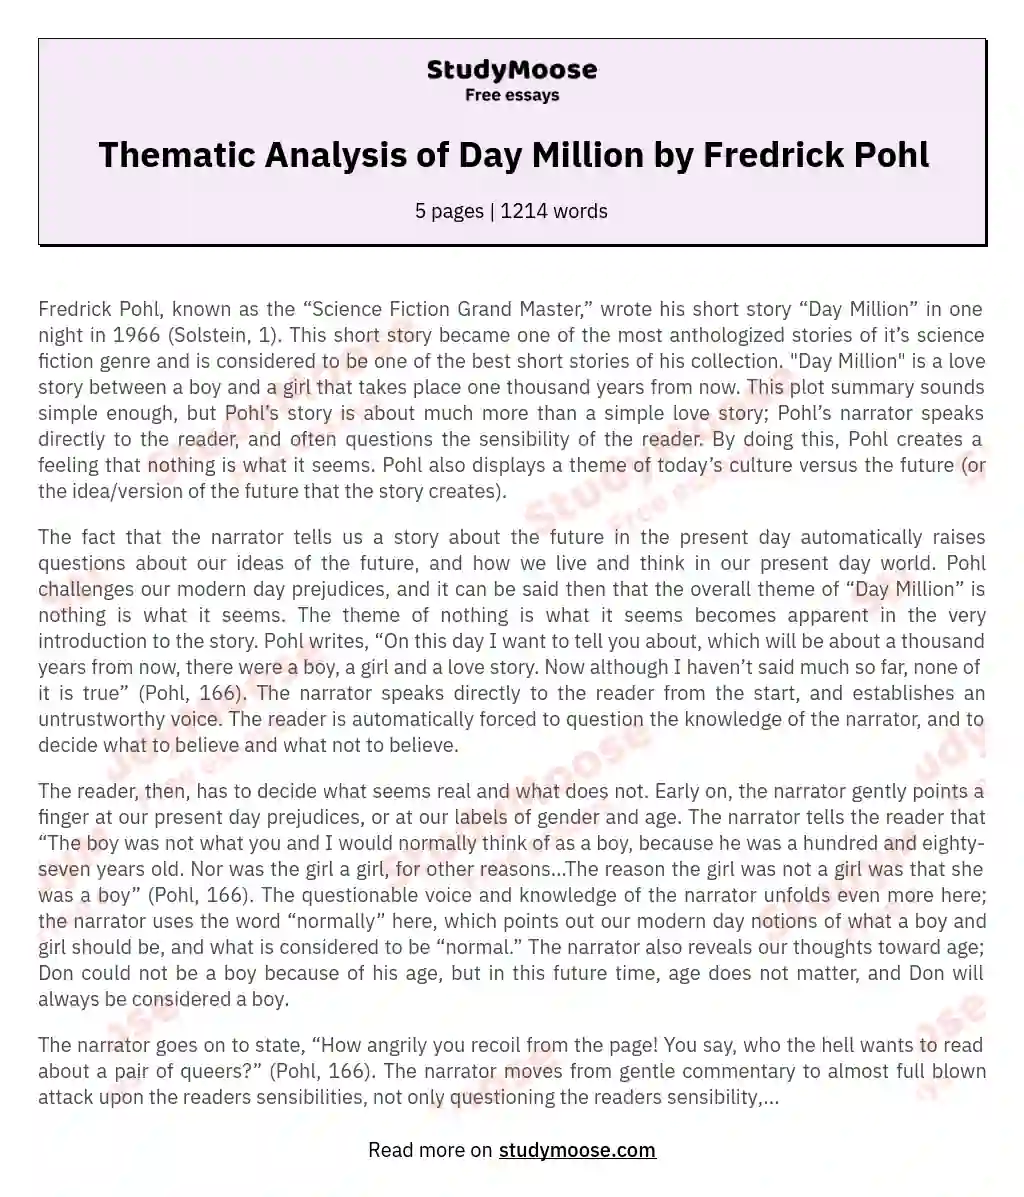 Thematic Analysis of Day Million by Fredrick Pohl essay